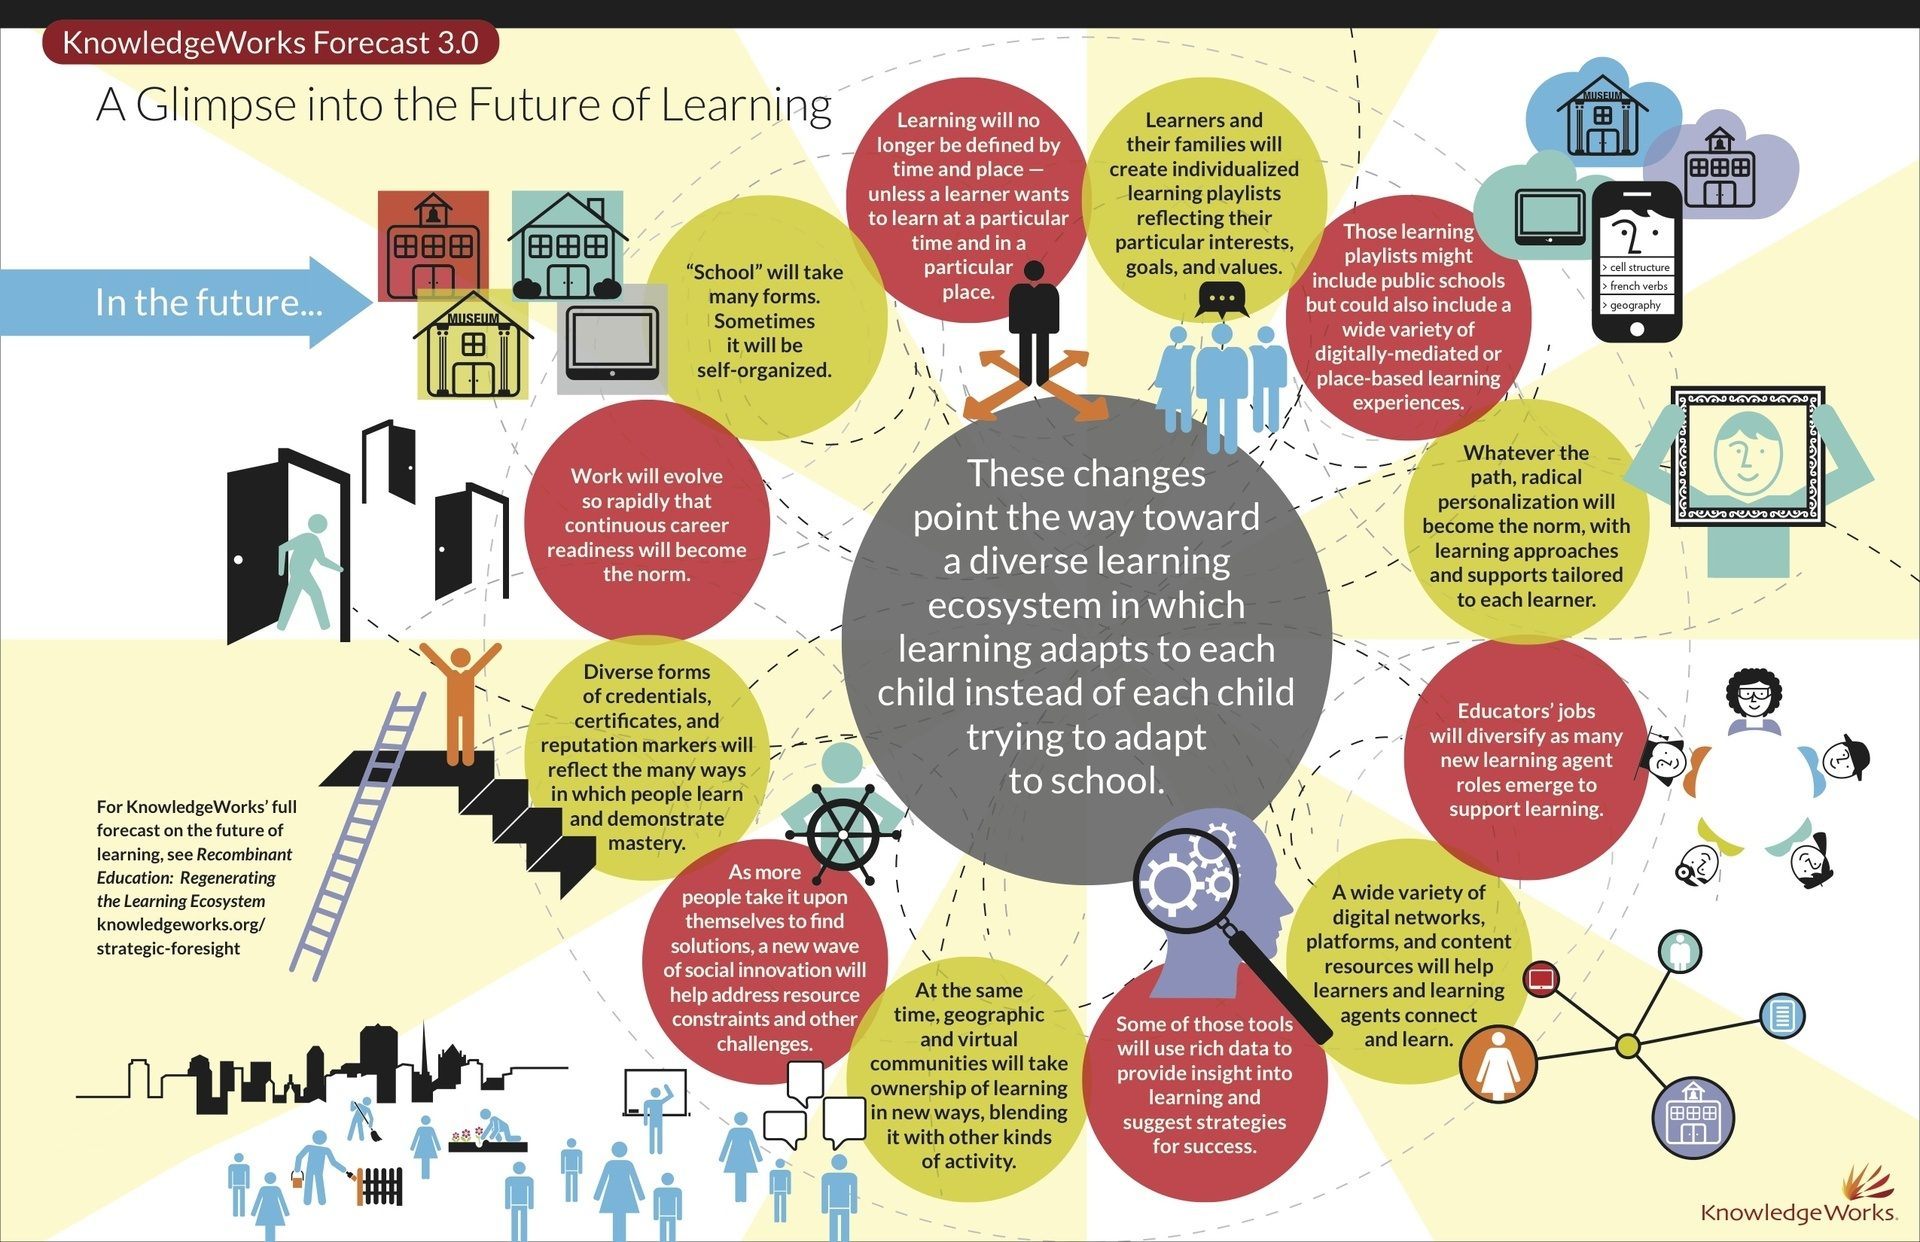 Catching A Glimpse Into The Future of Learning Infographic